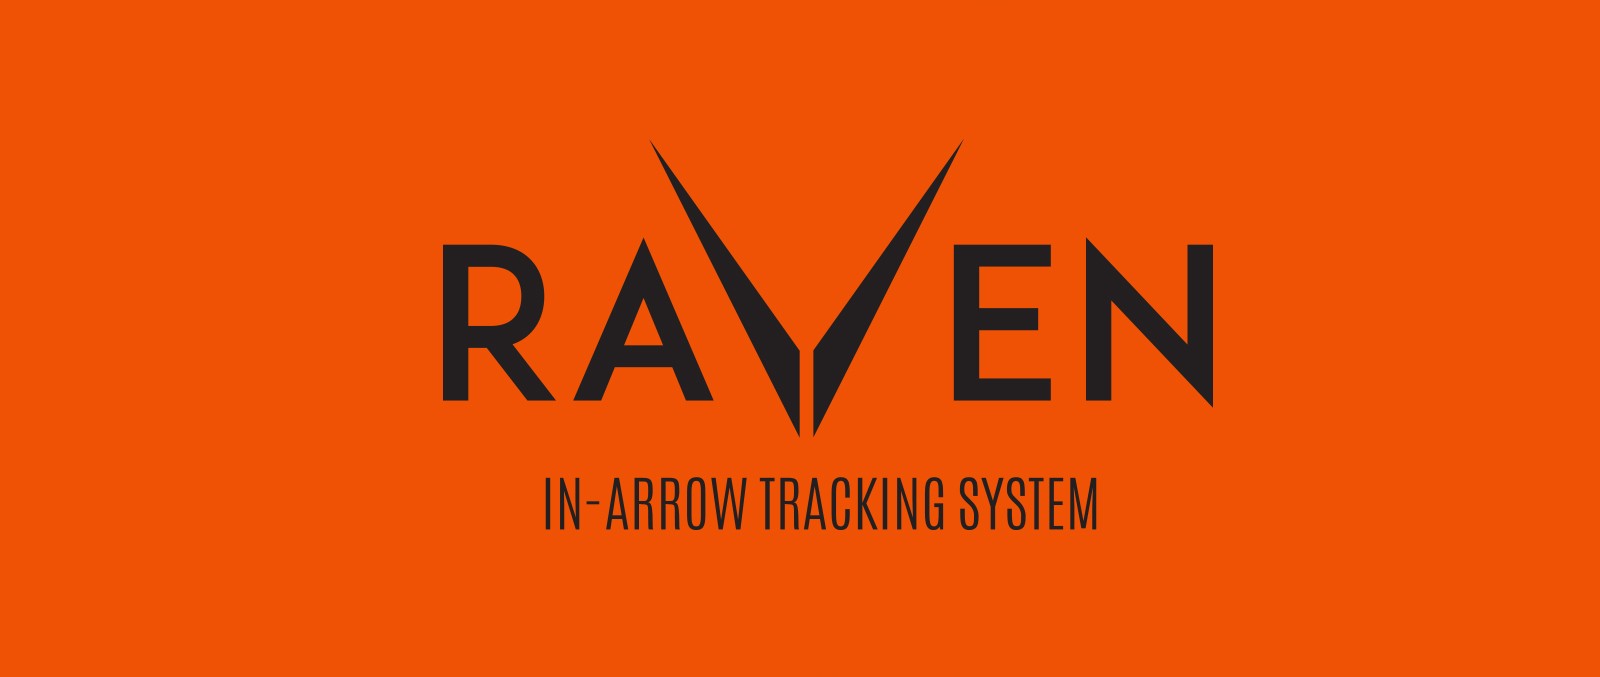 Raven In-Arrow Tracking System